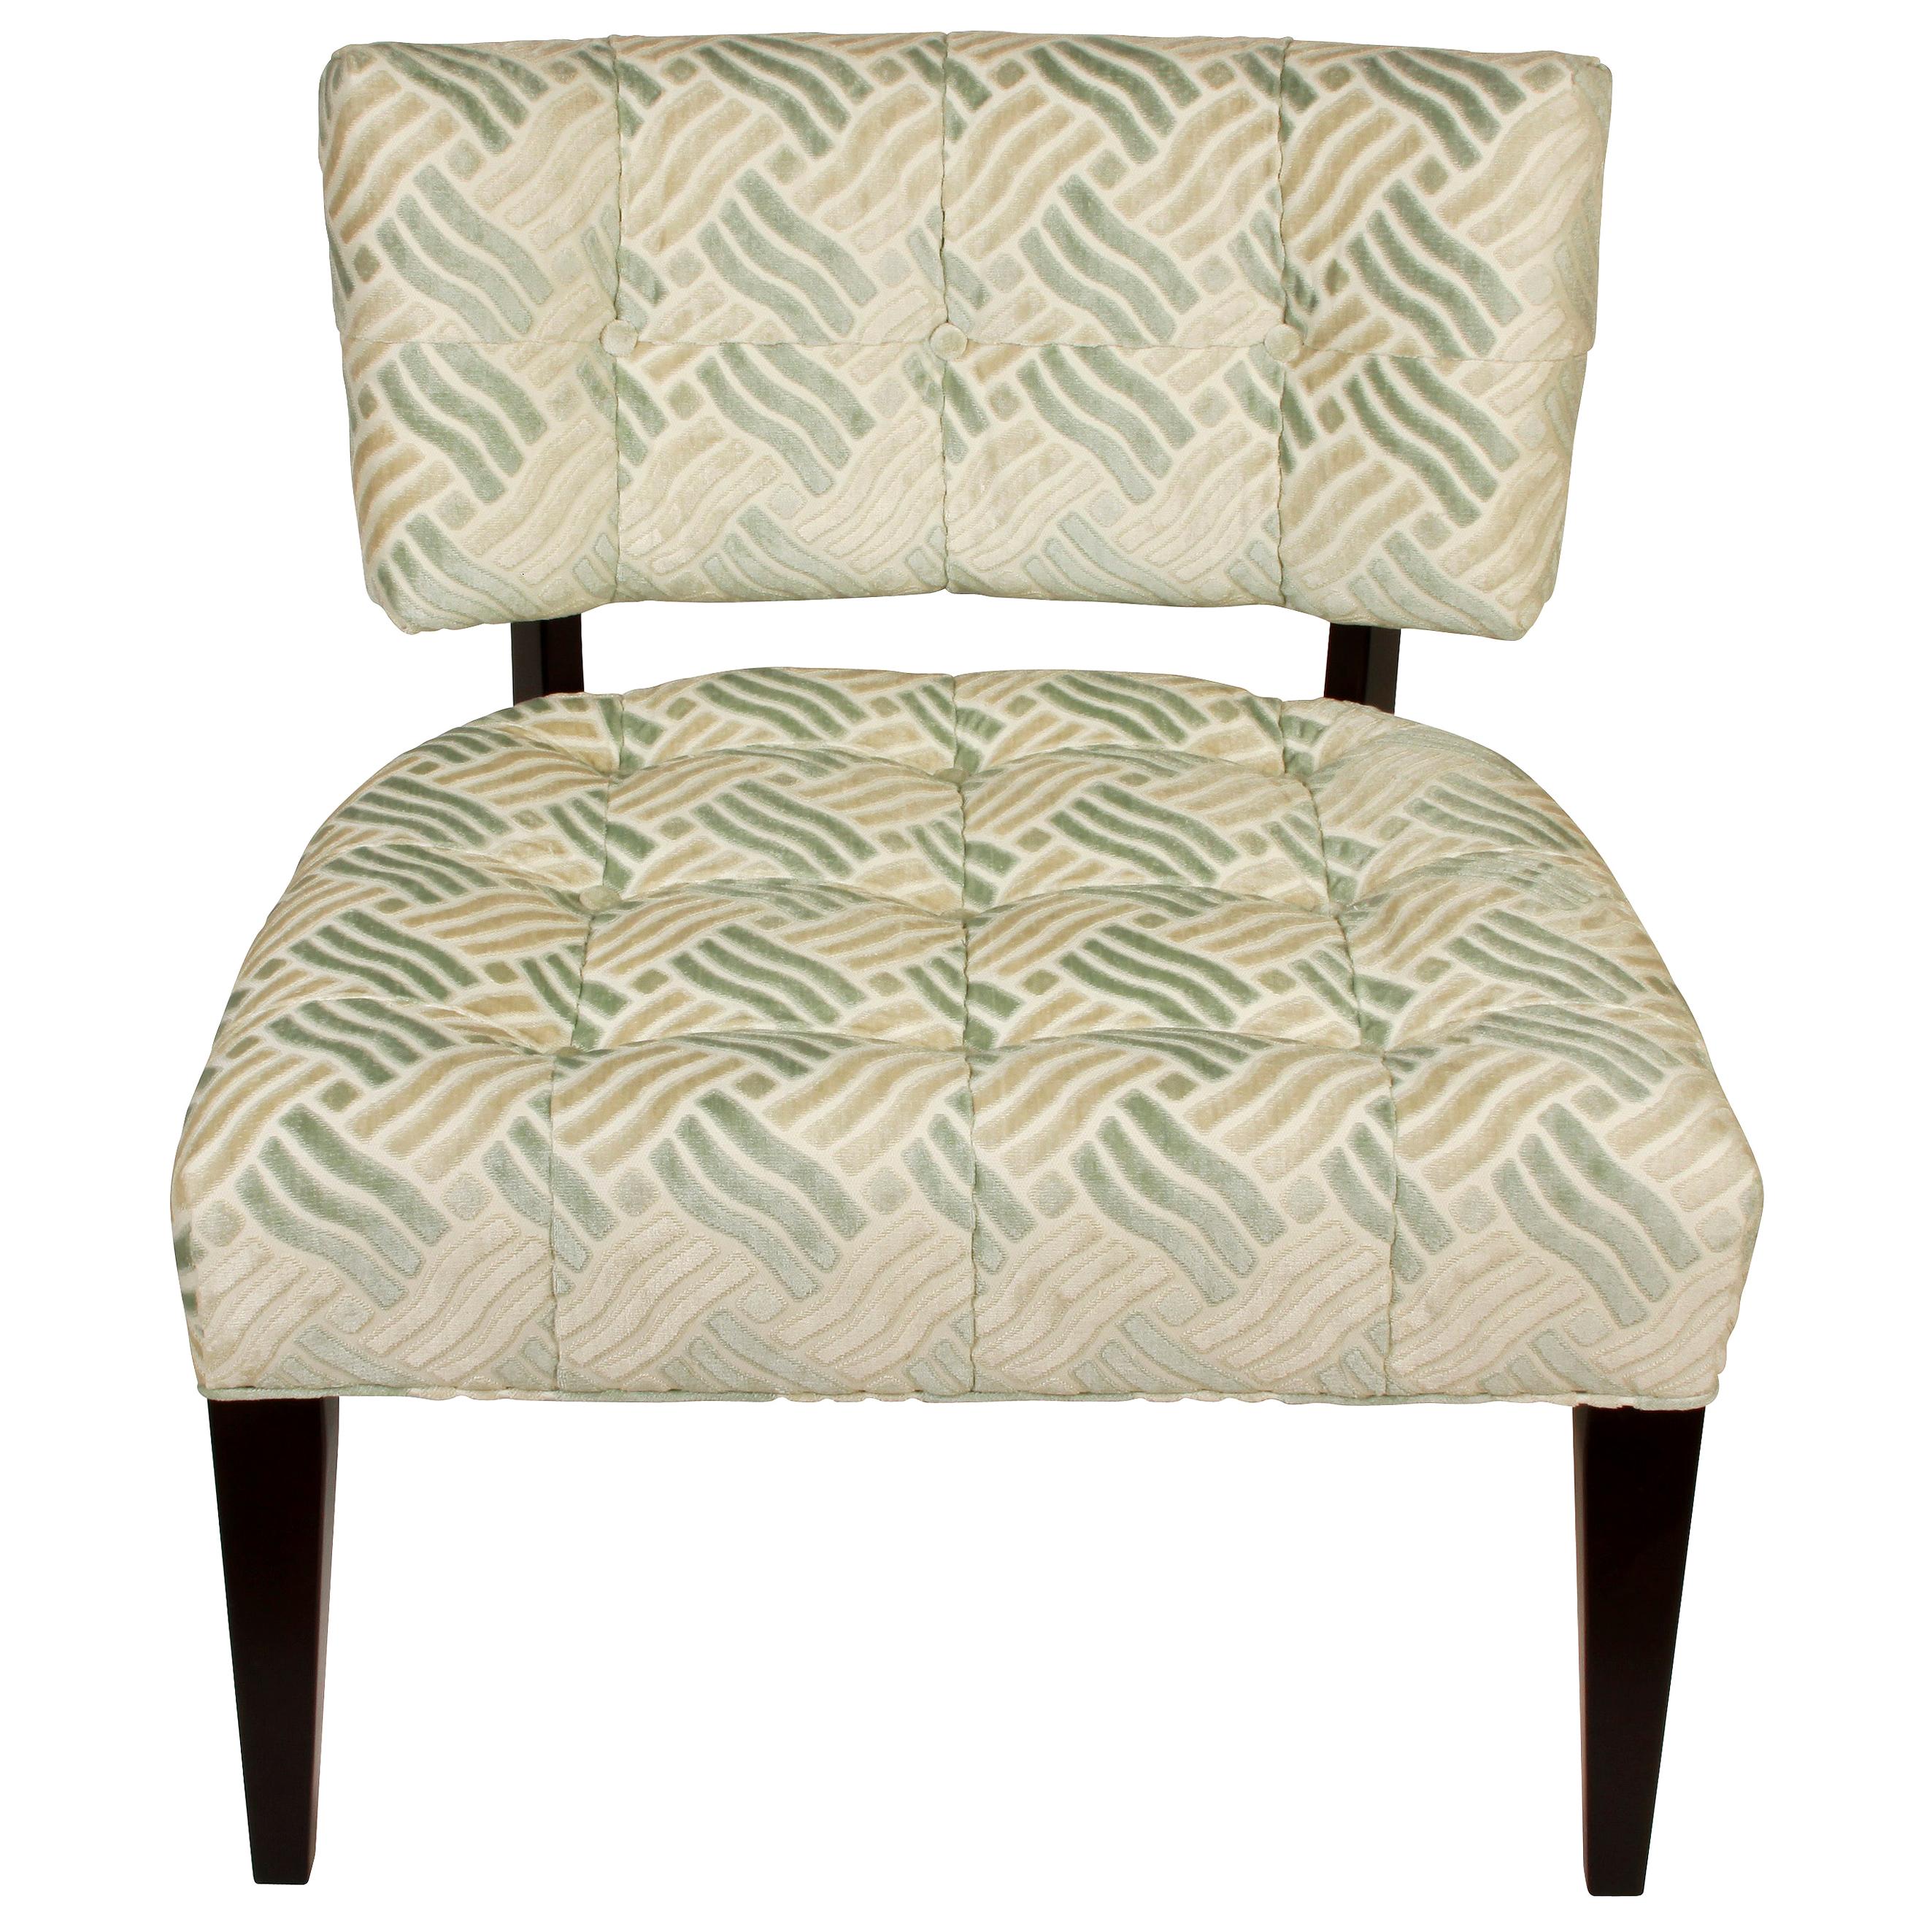 Pair of Low Mid-Century Modern Chairs in Fret Velvet Fabric For Sale